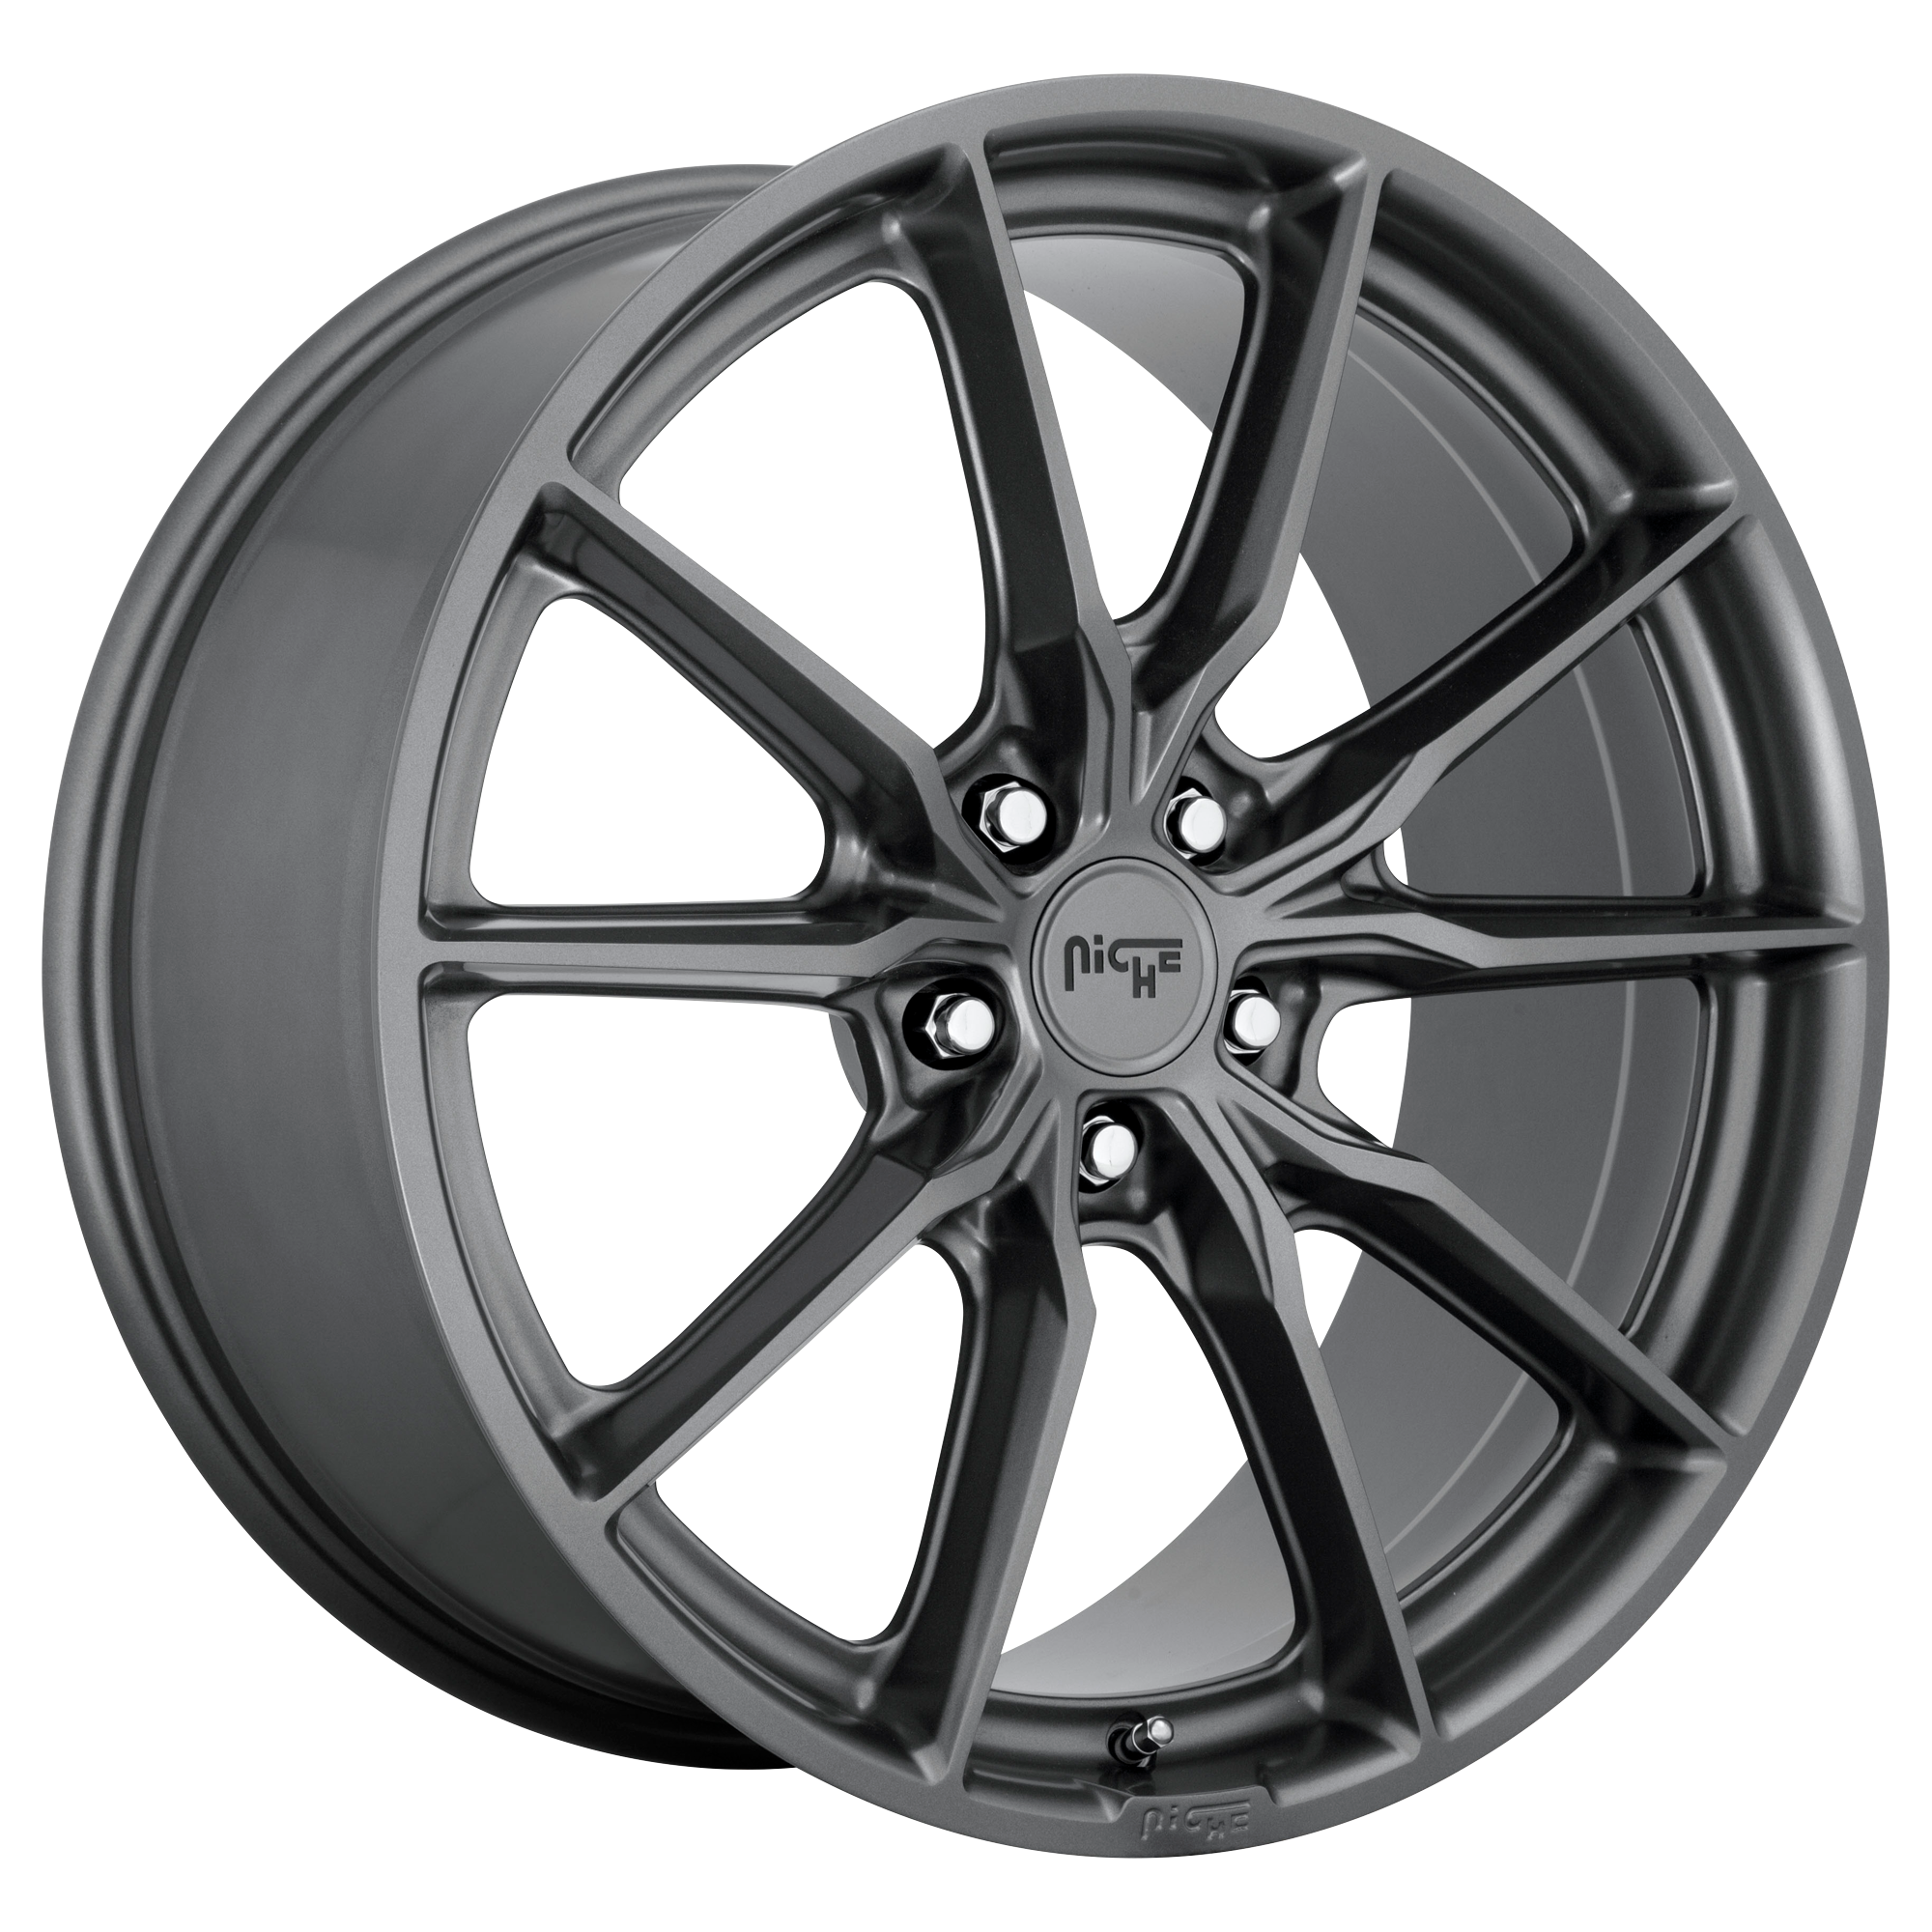 RAINIER 18x8 5x114.30 MATTE ANTHRACITE (40 mm) - Tires and Engine Performance